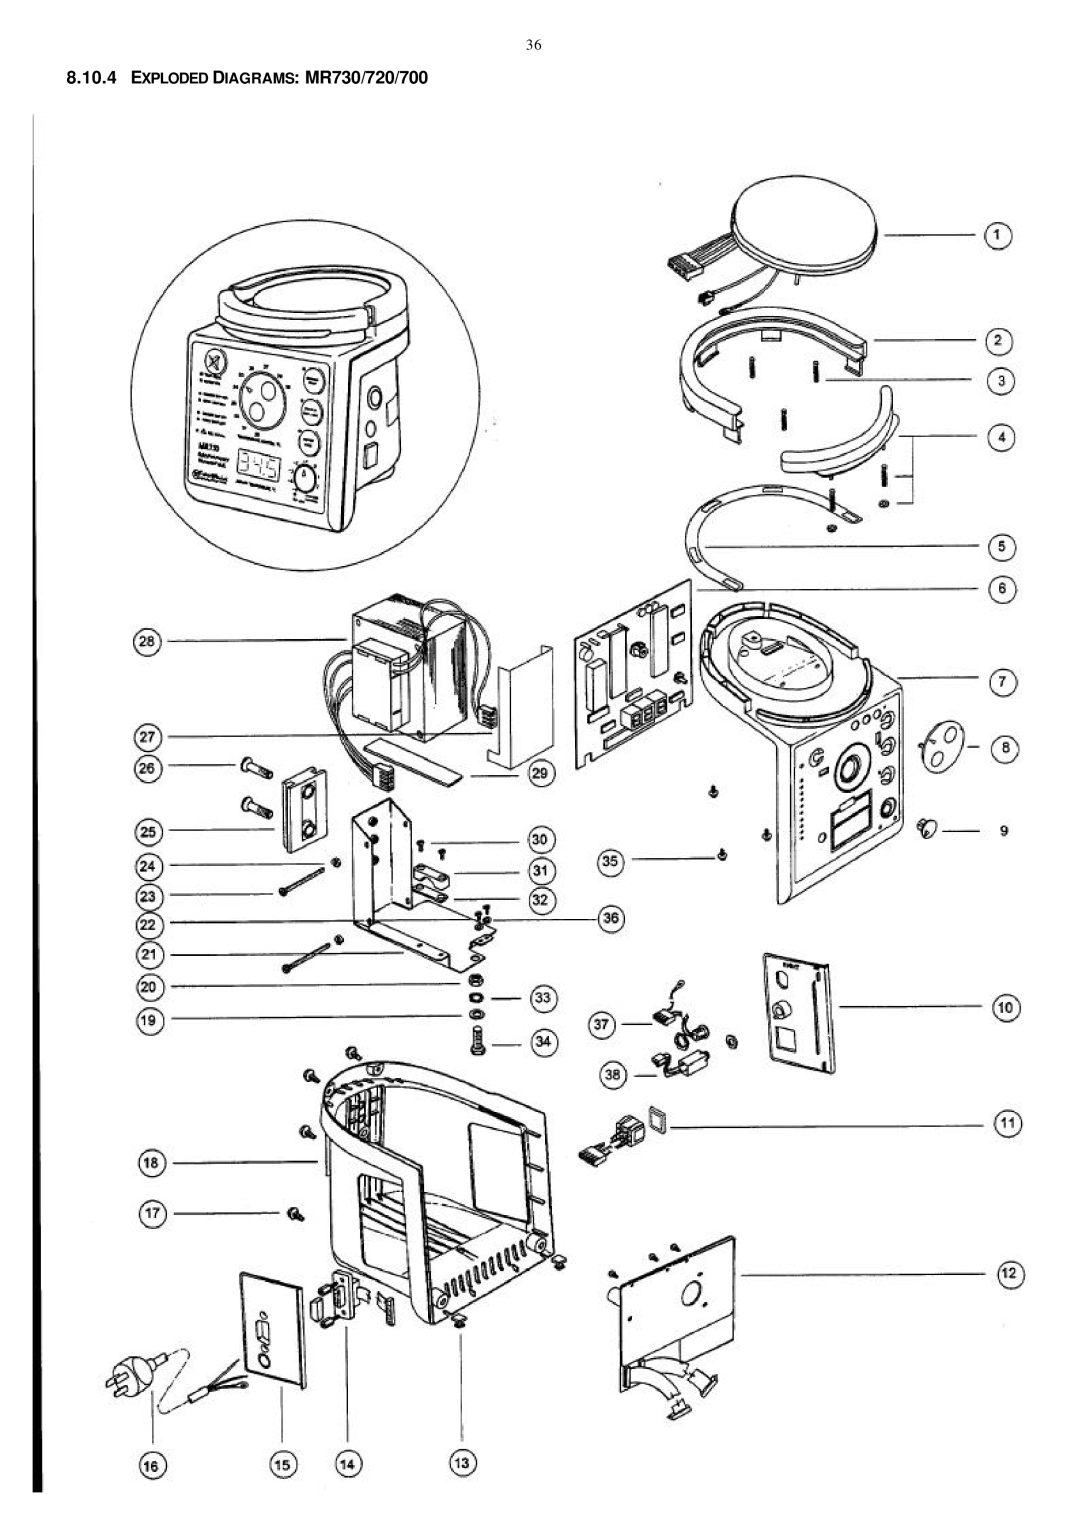 Fisher & Paykel MR480, MR720, MR700 technical manual Exploded Diagrams MR730/720/700 